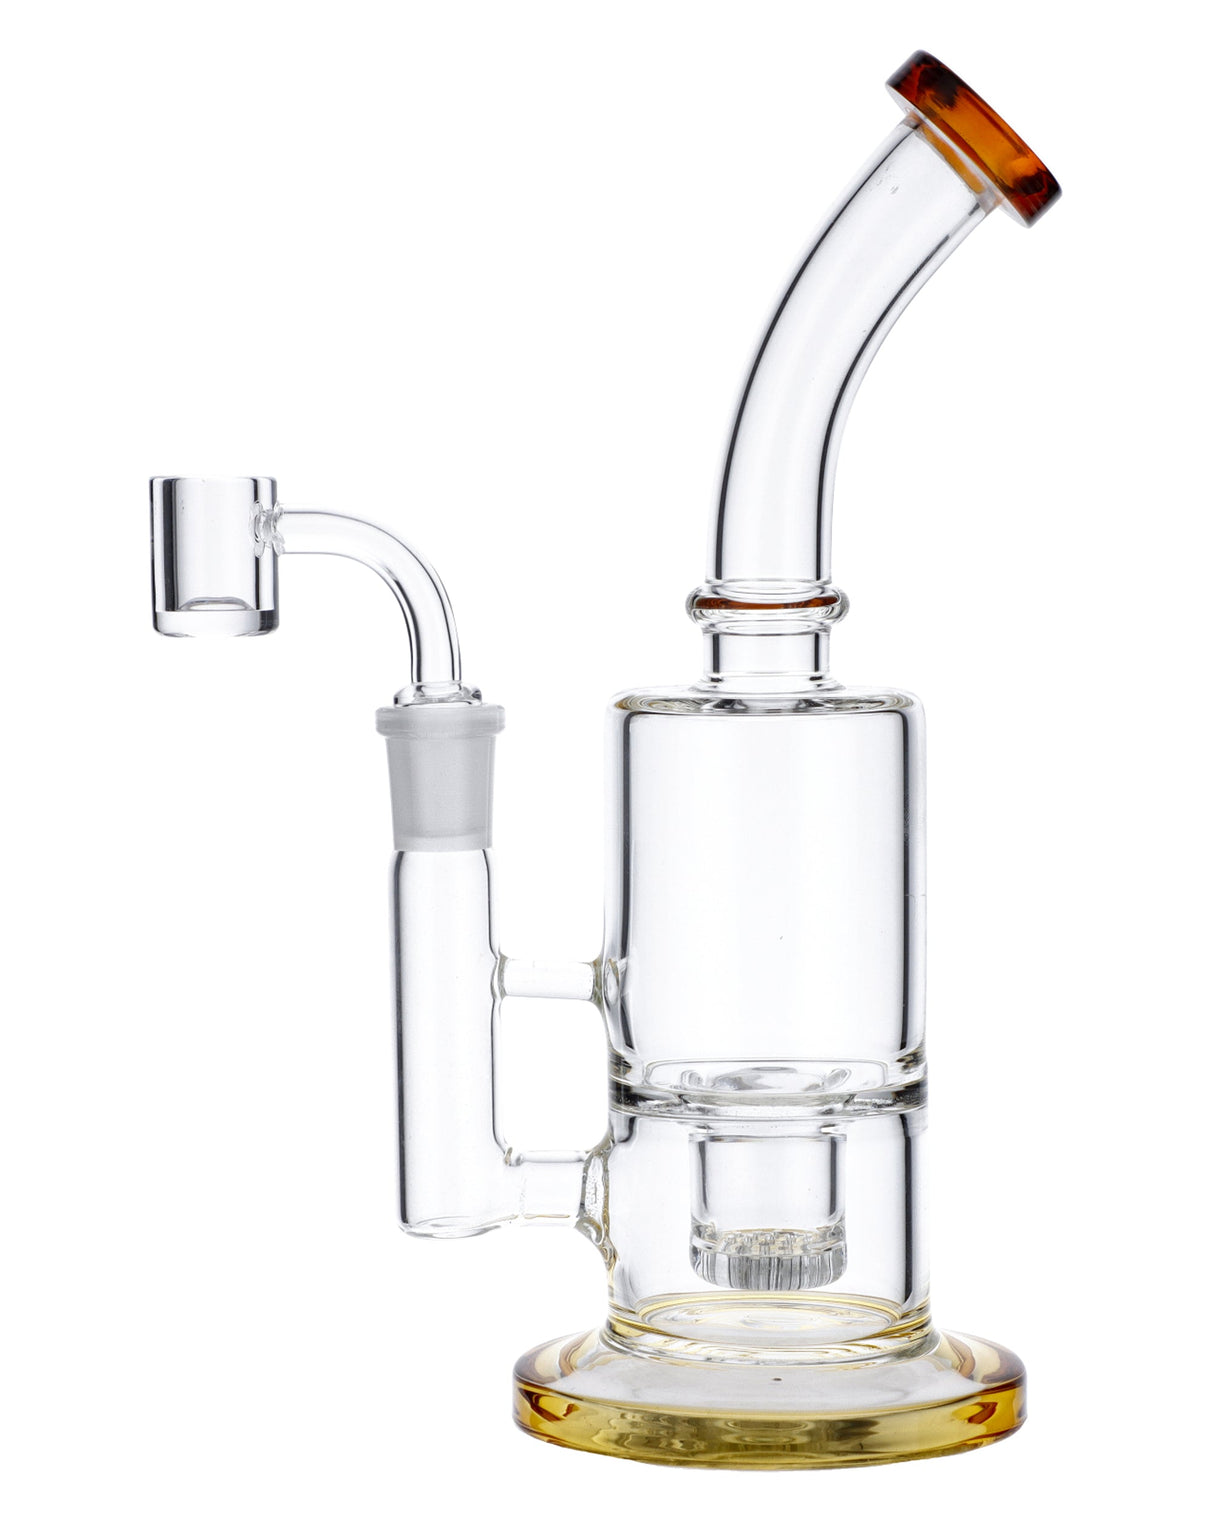 Yellow Valiant Bubbler Rig, 8 inch, 90 Degree Joint for Concentrates, Clear Borosilicate Glass, Front View